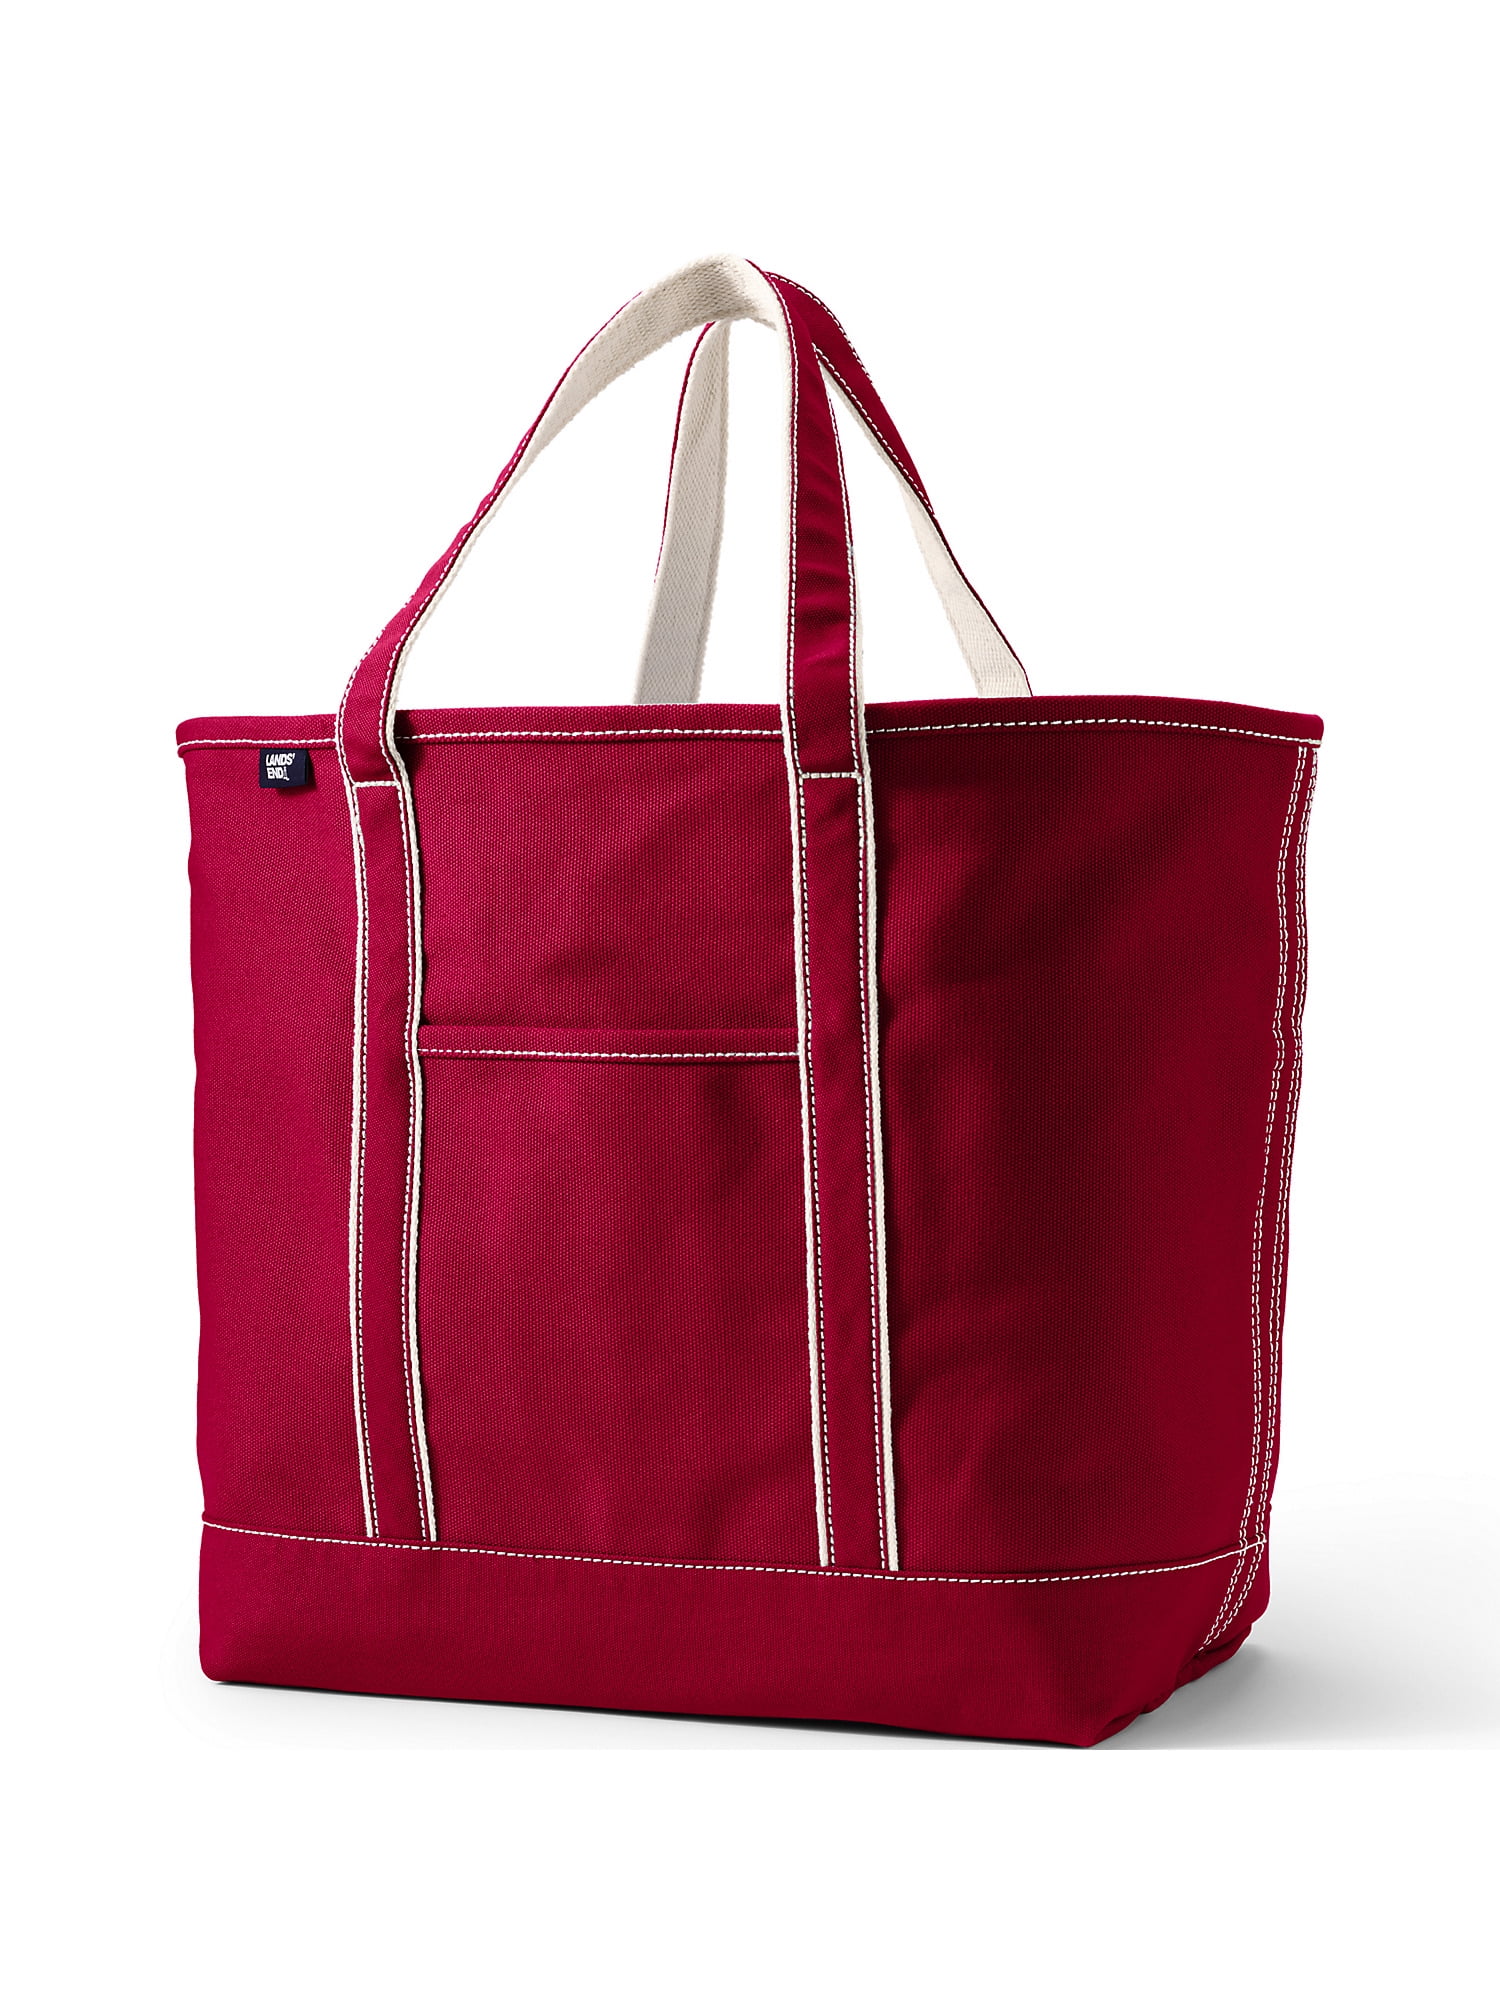  Lands' End Print Open Top Canvas Tote Rich Red Multi